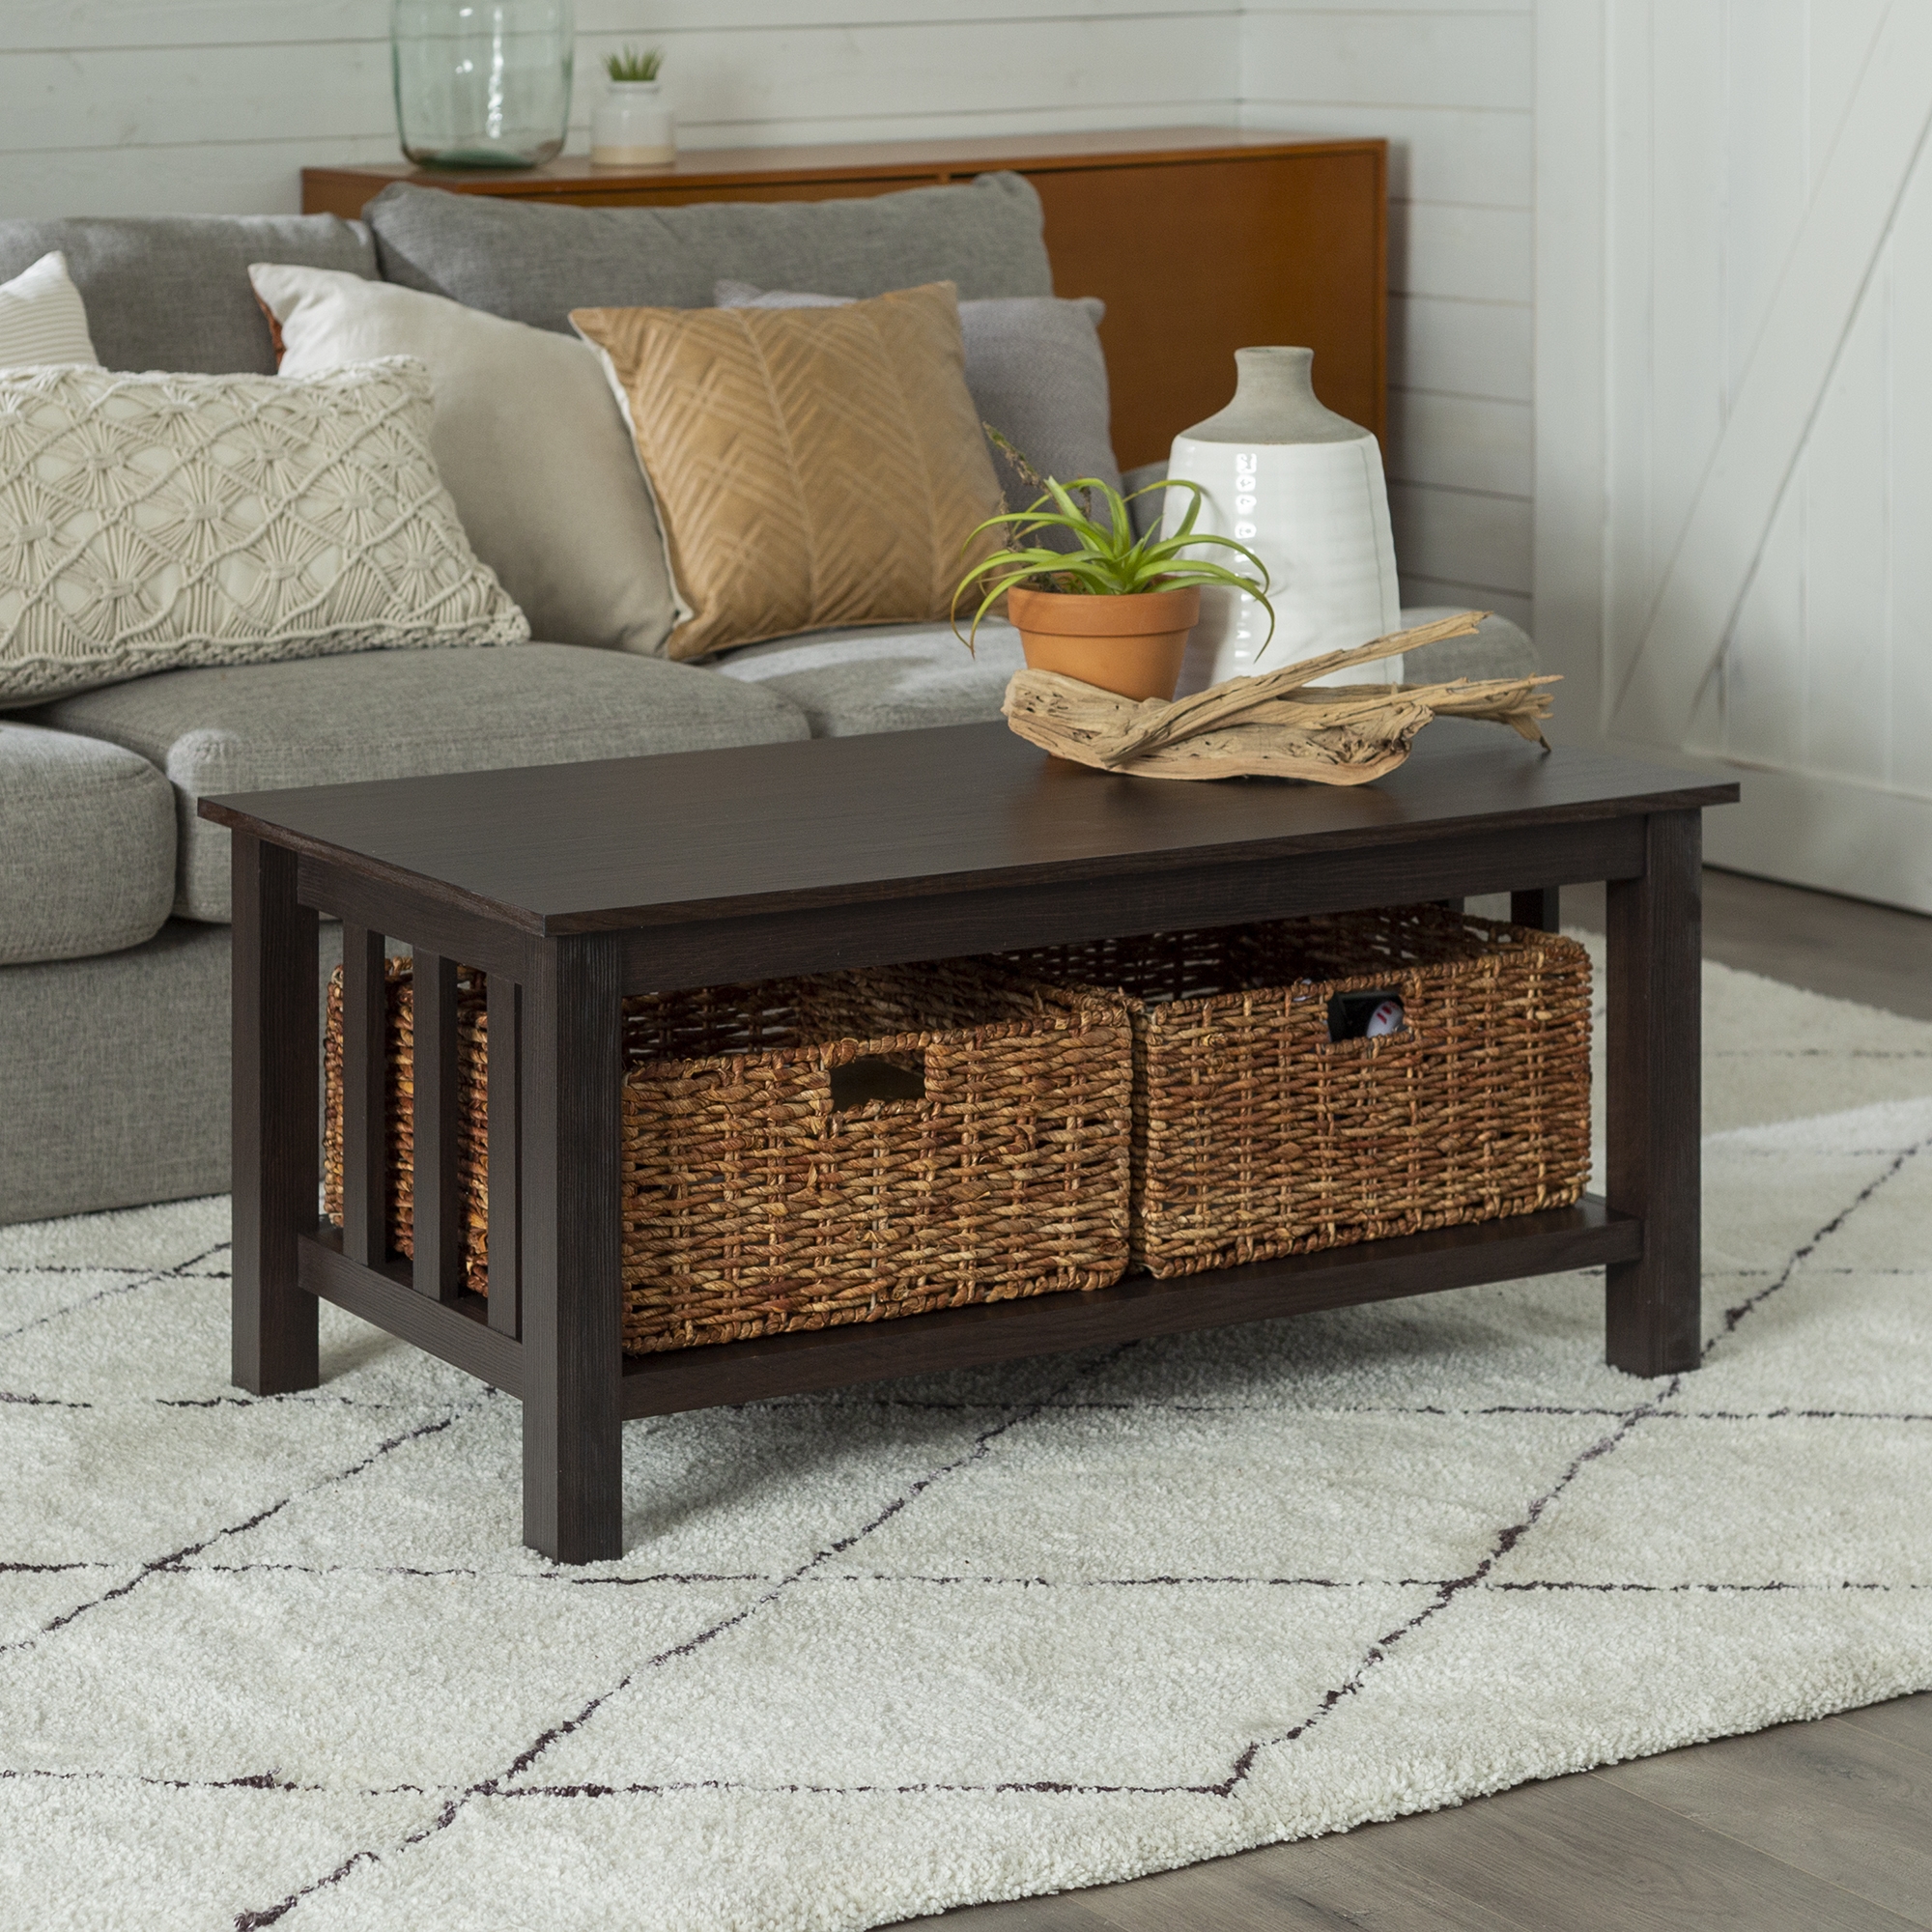 Mission Storage Coffee Table with Baskets - Espresso - Image 6